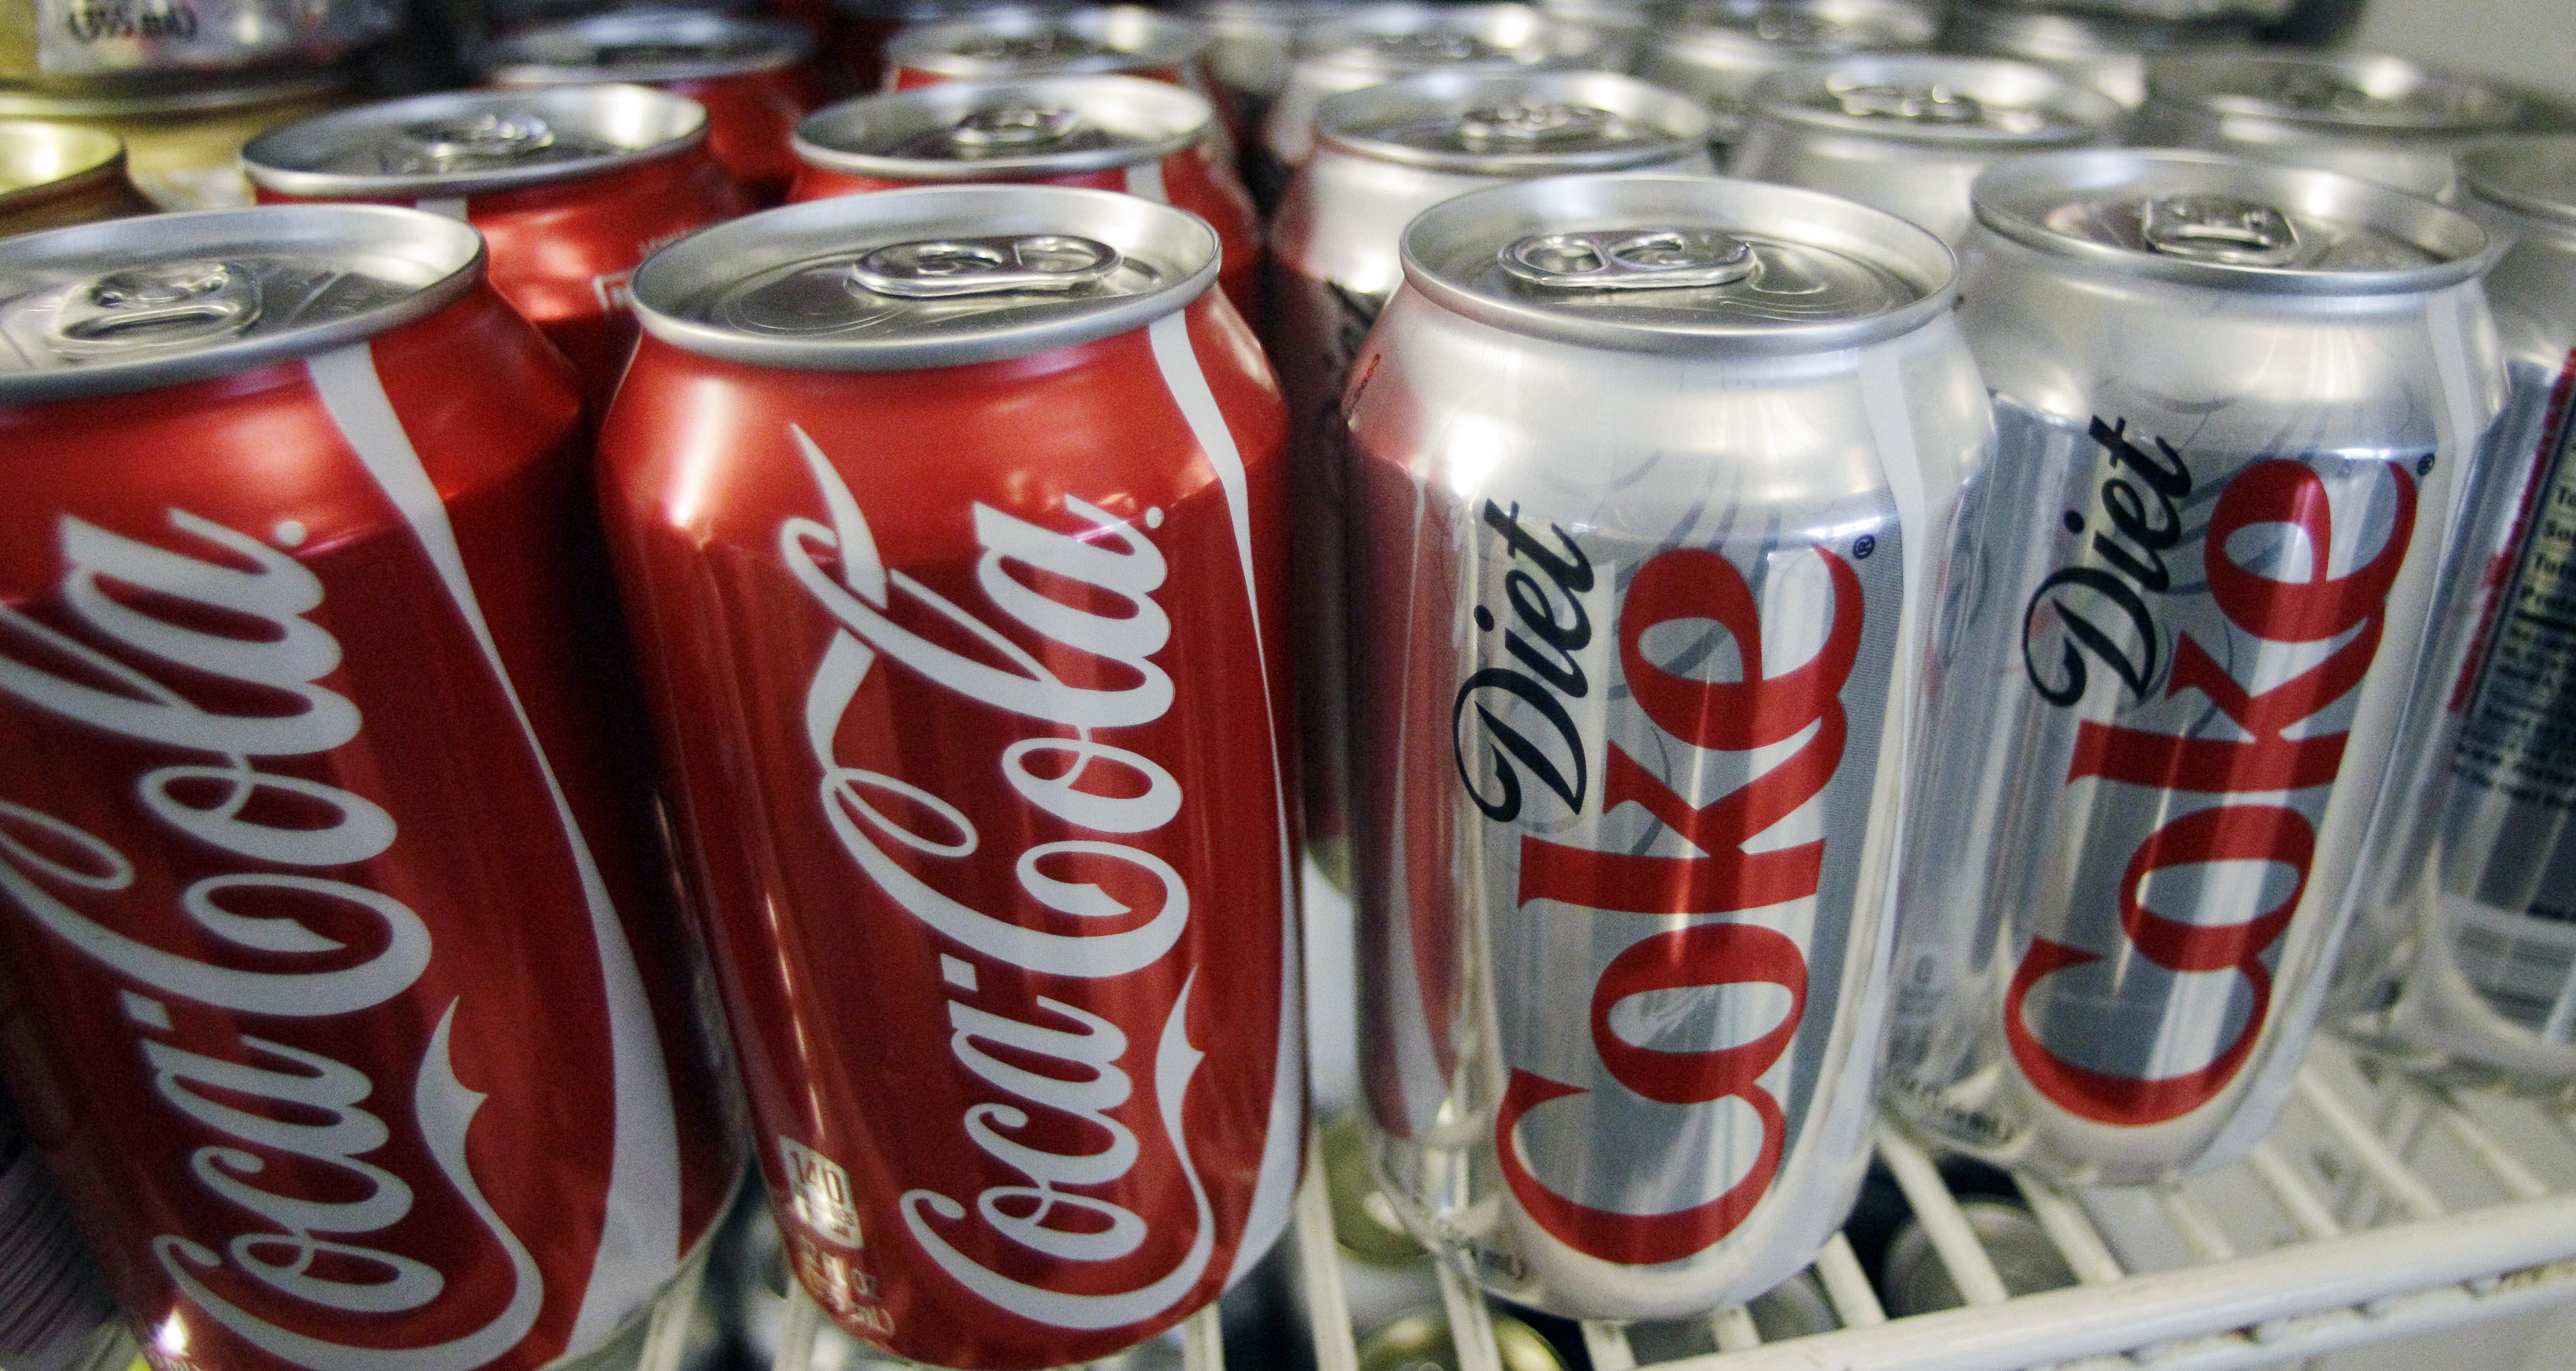 (AP file photo) Can of Coca-Cola and Diet Coke are shown in 2011 in Portland, Ore. Unlike want many church outsiders and some insiders think, Latter-day Saints can drink caffeinated colas.